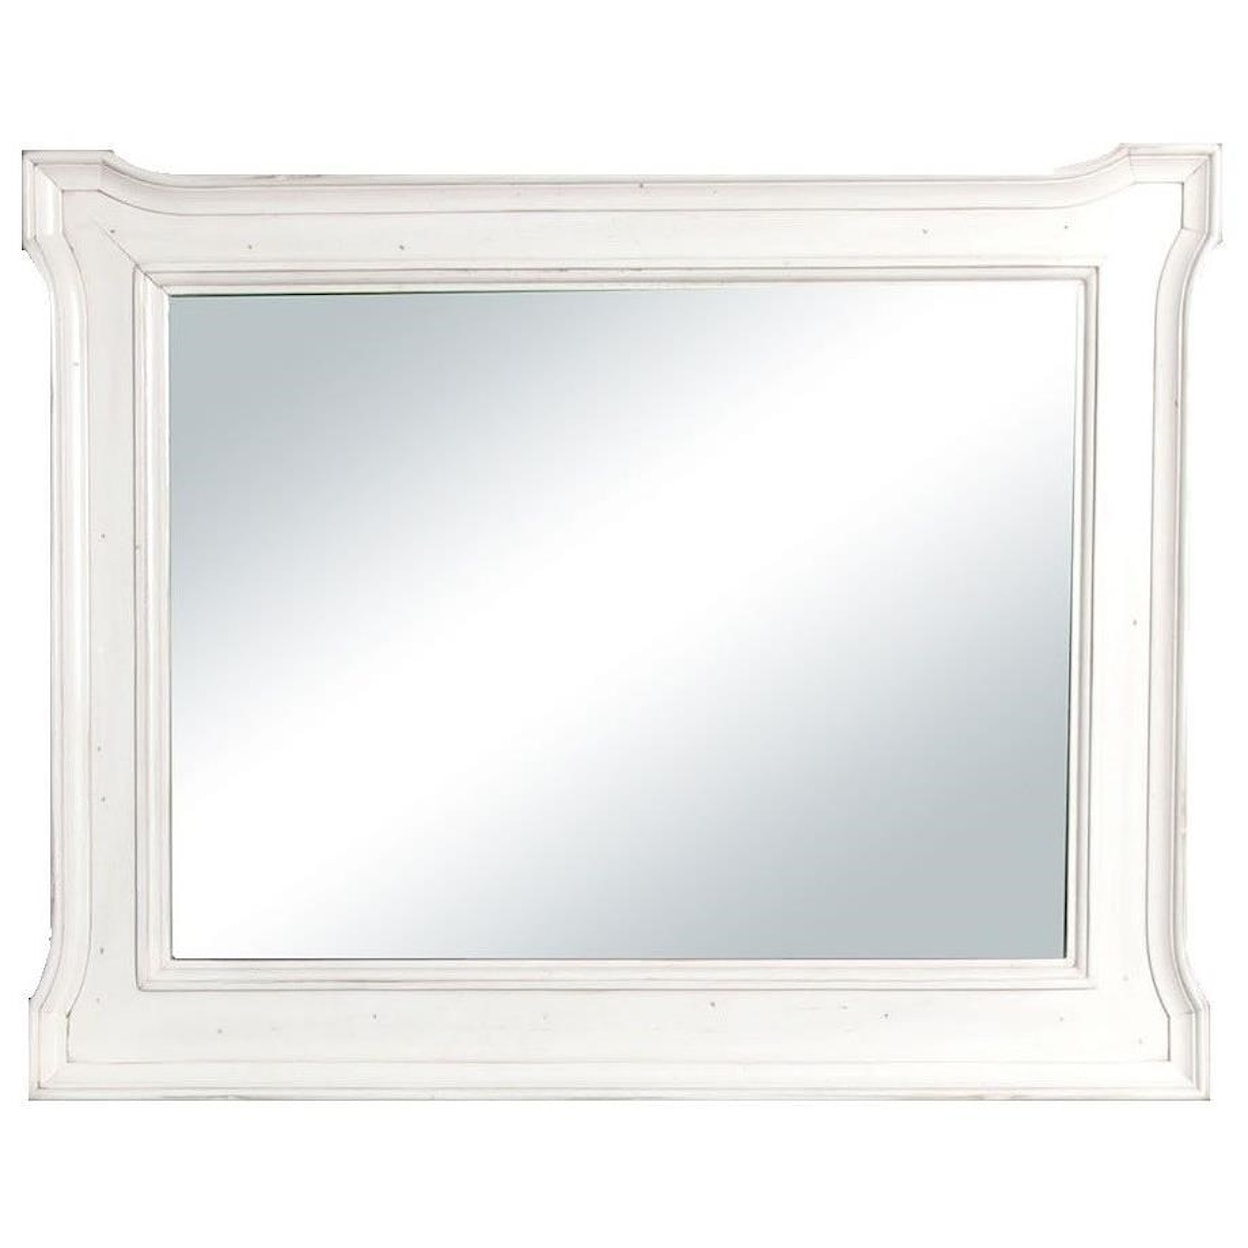 Sunny Designs Carriage House Mirror